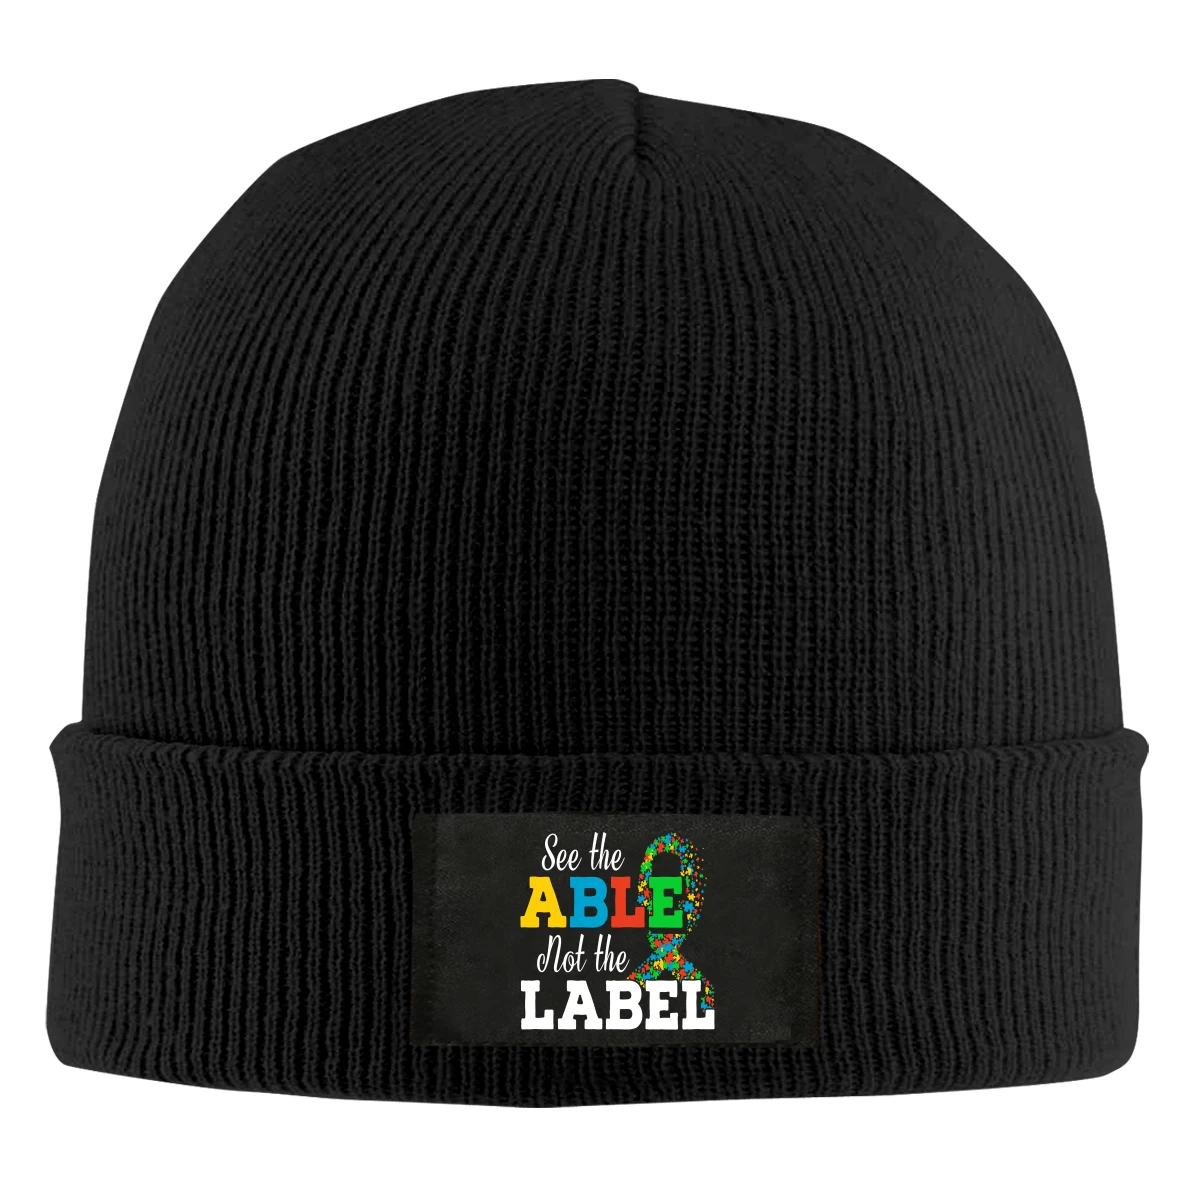 

See The Able Not The Label Beanie Hats For Men Women With Designs Winter Slouchy Knit Skull Cap